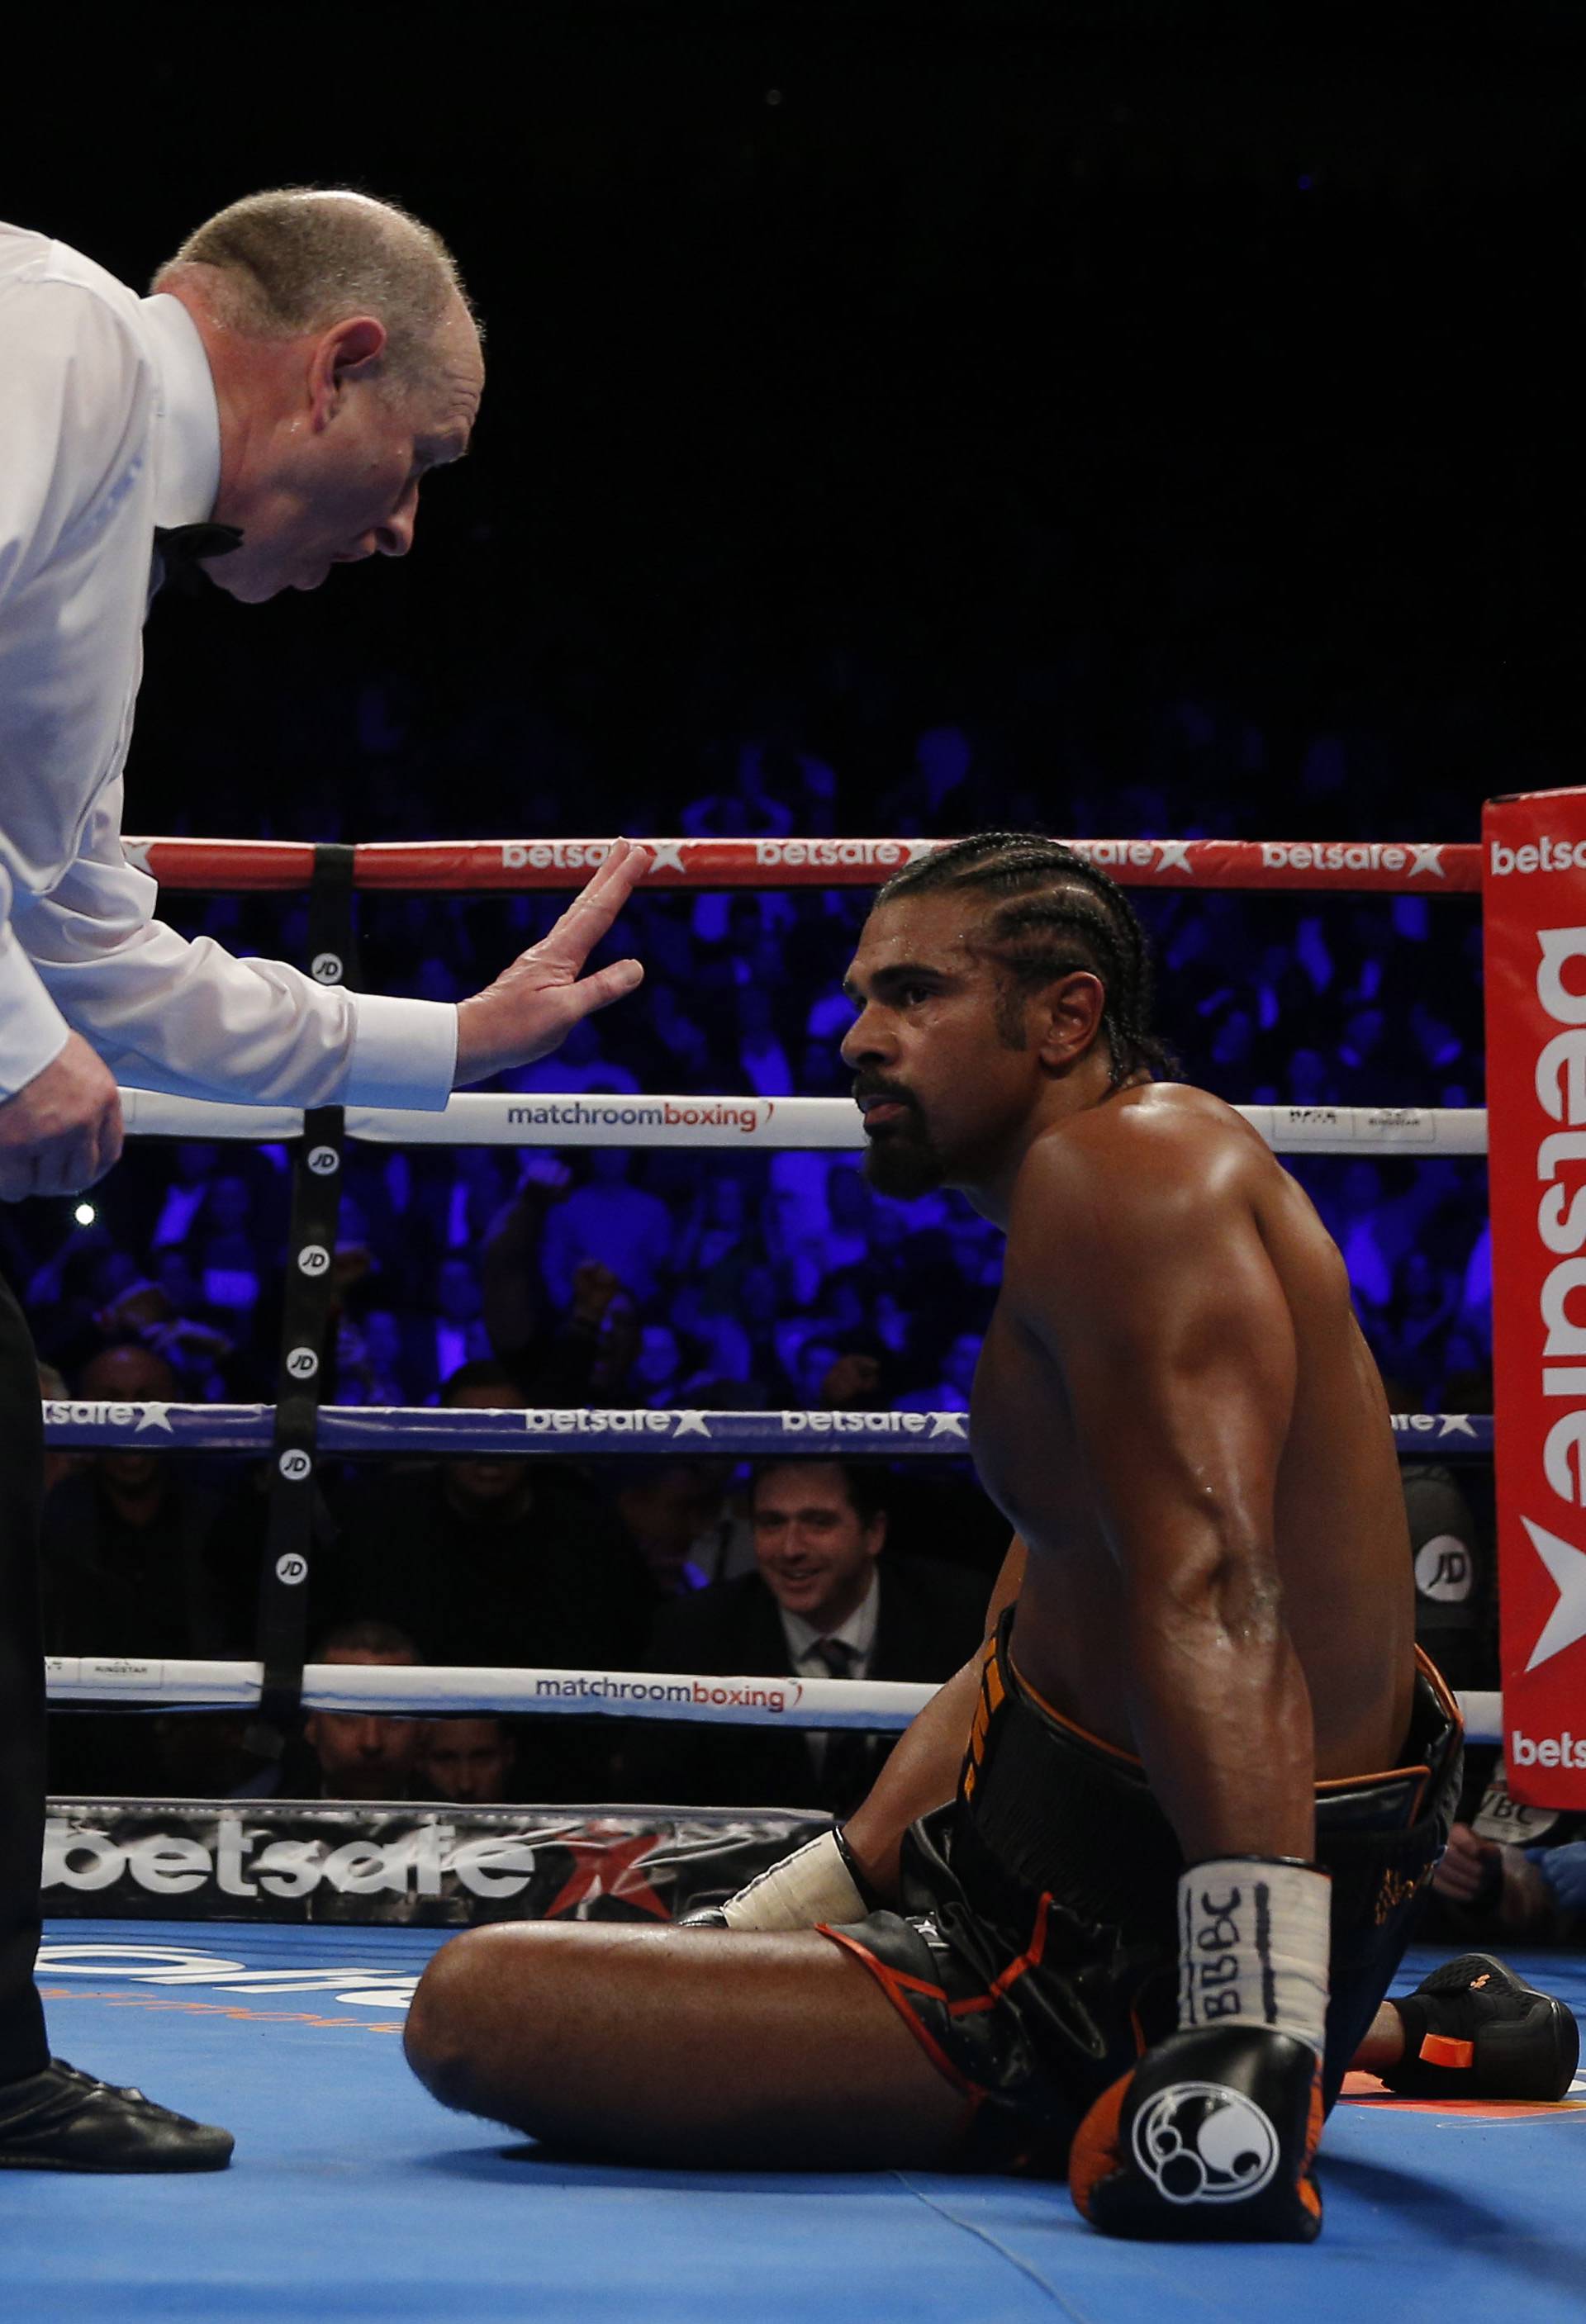 David Haye is given the count by the referee